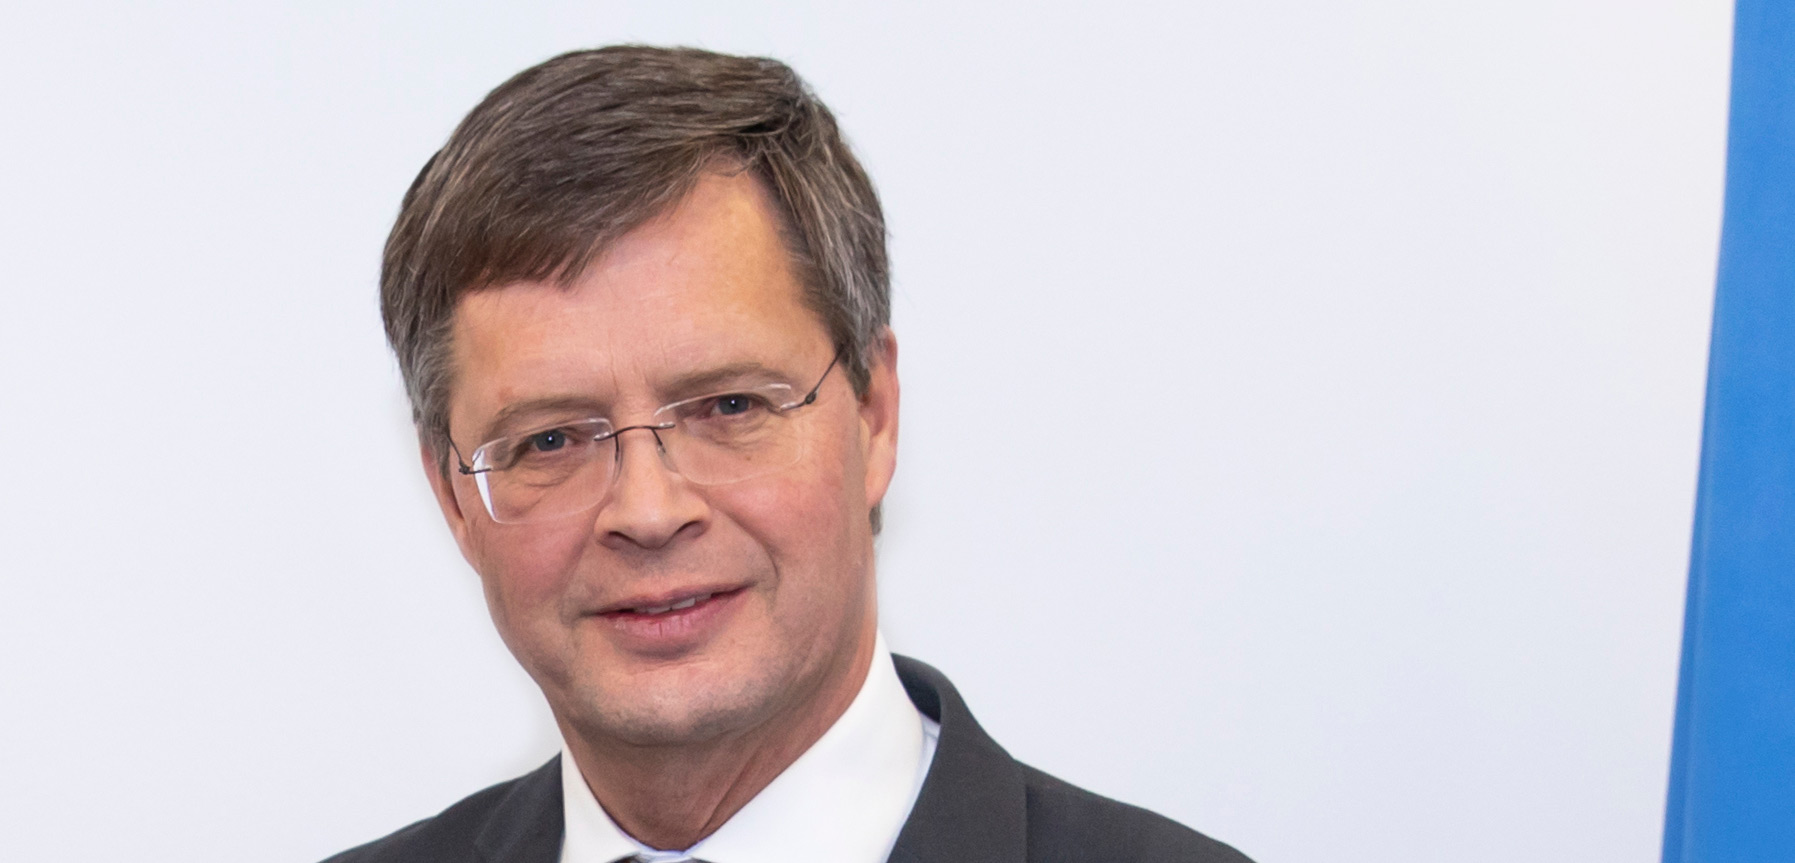 Jan Peter Balkenende: Against the current for the Common Good